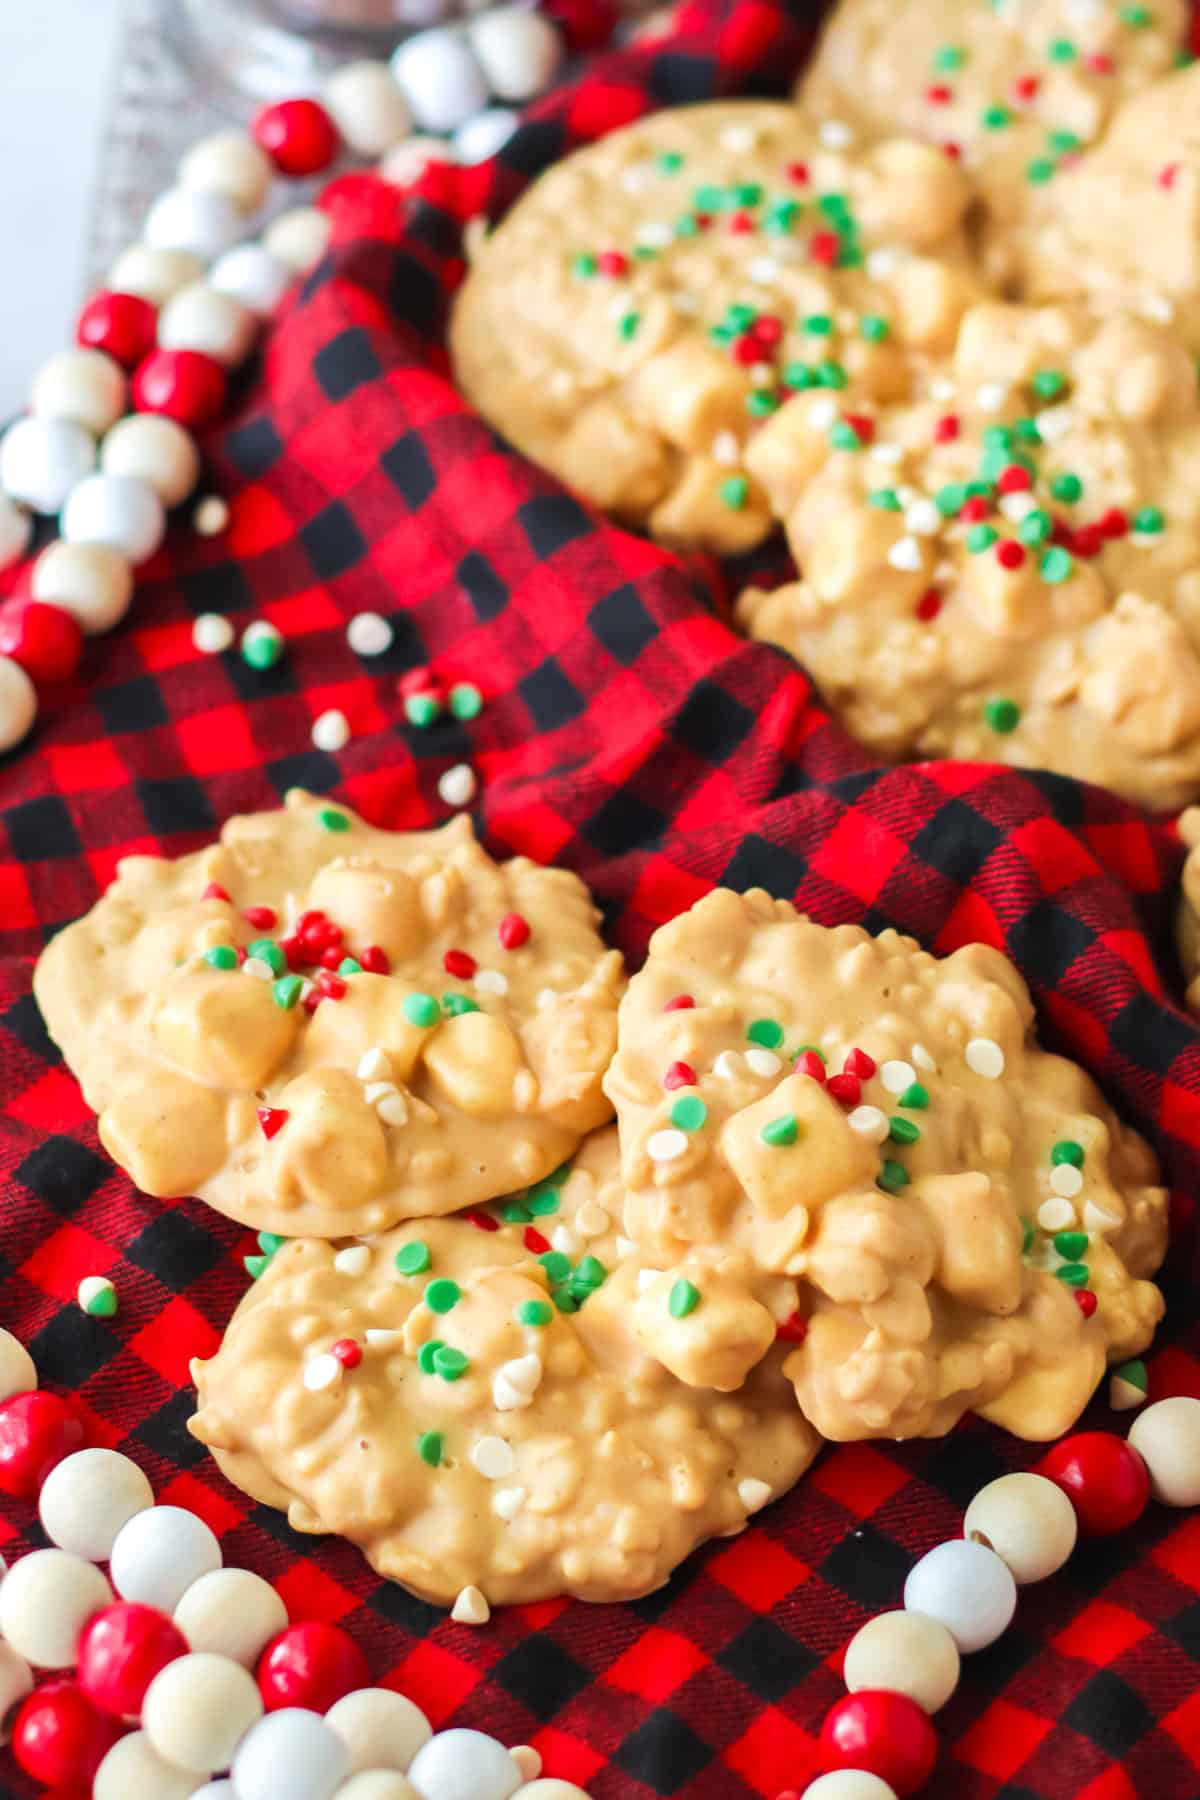 White chocolate, peanut butter, and marshmallow clusters topped with christmas sprinkles surrounded by holiday decor.